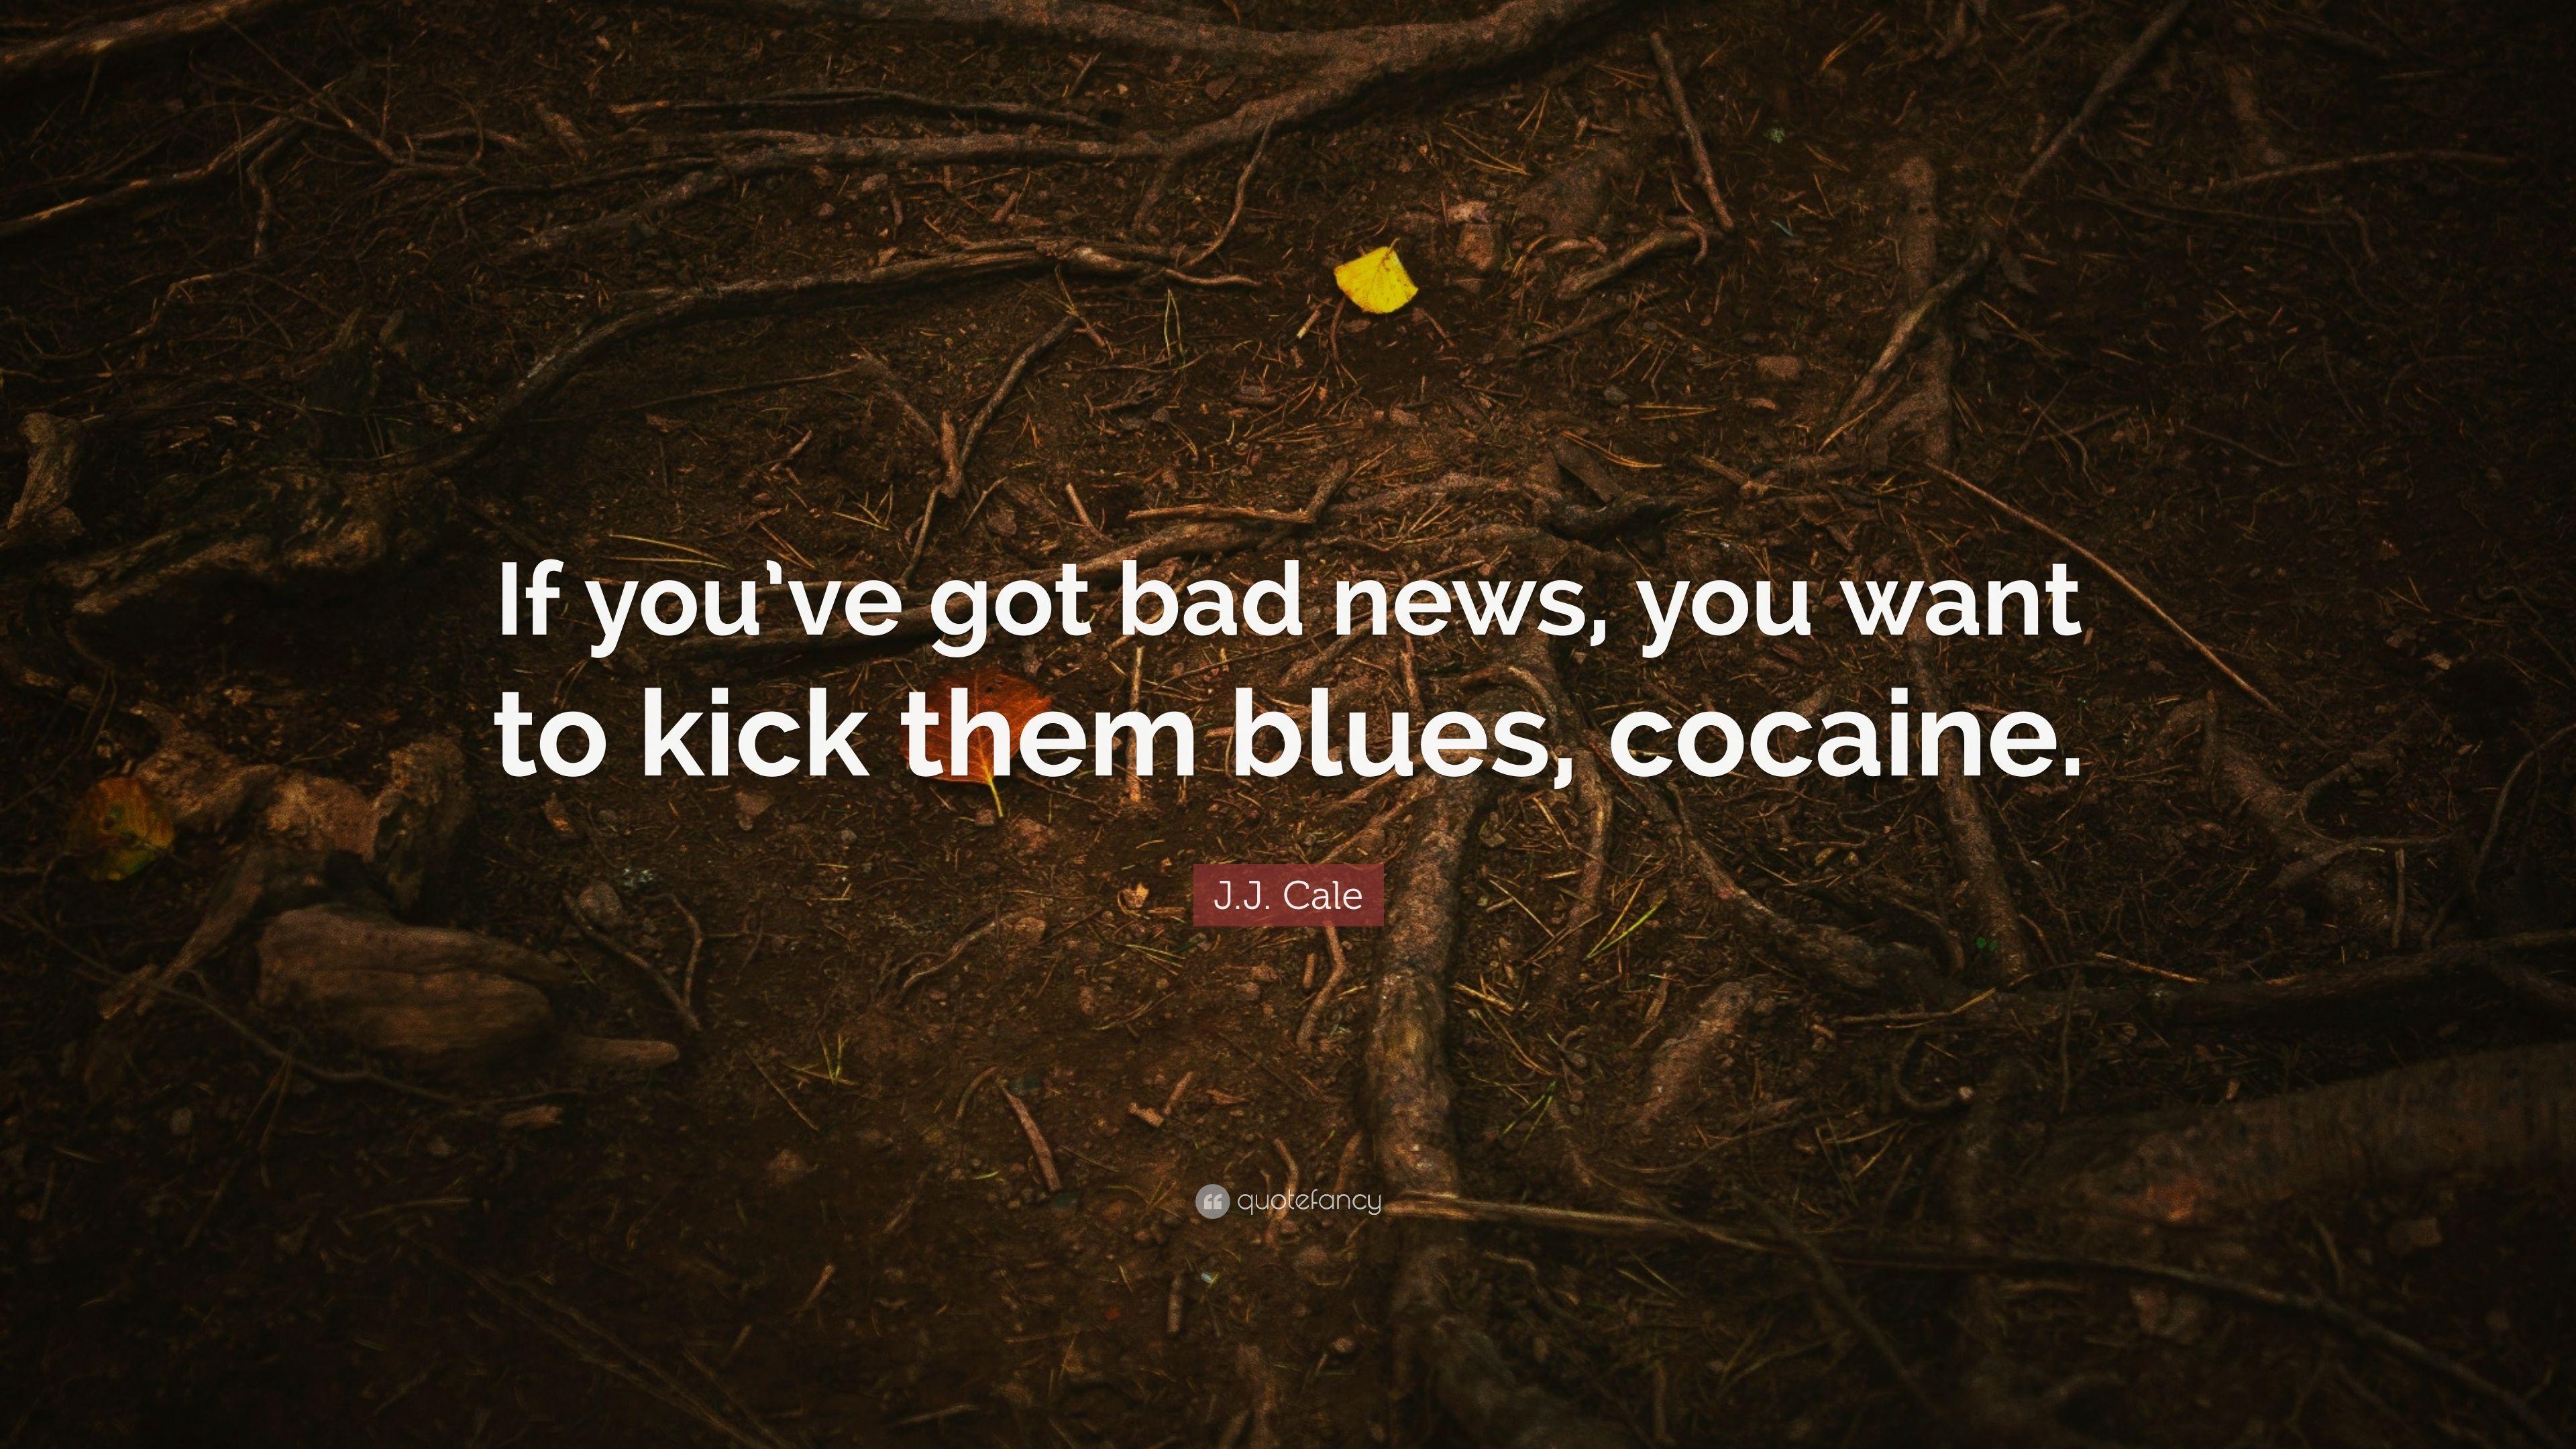 J.J. Cale Quote: “If you've got bad news, you want to kick them